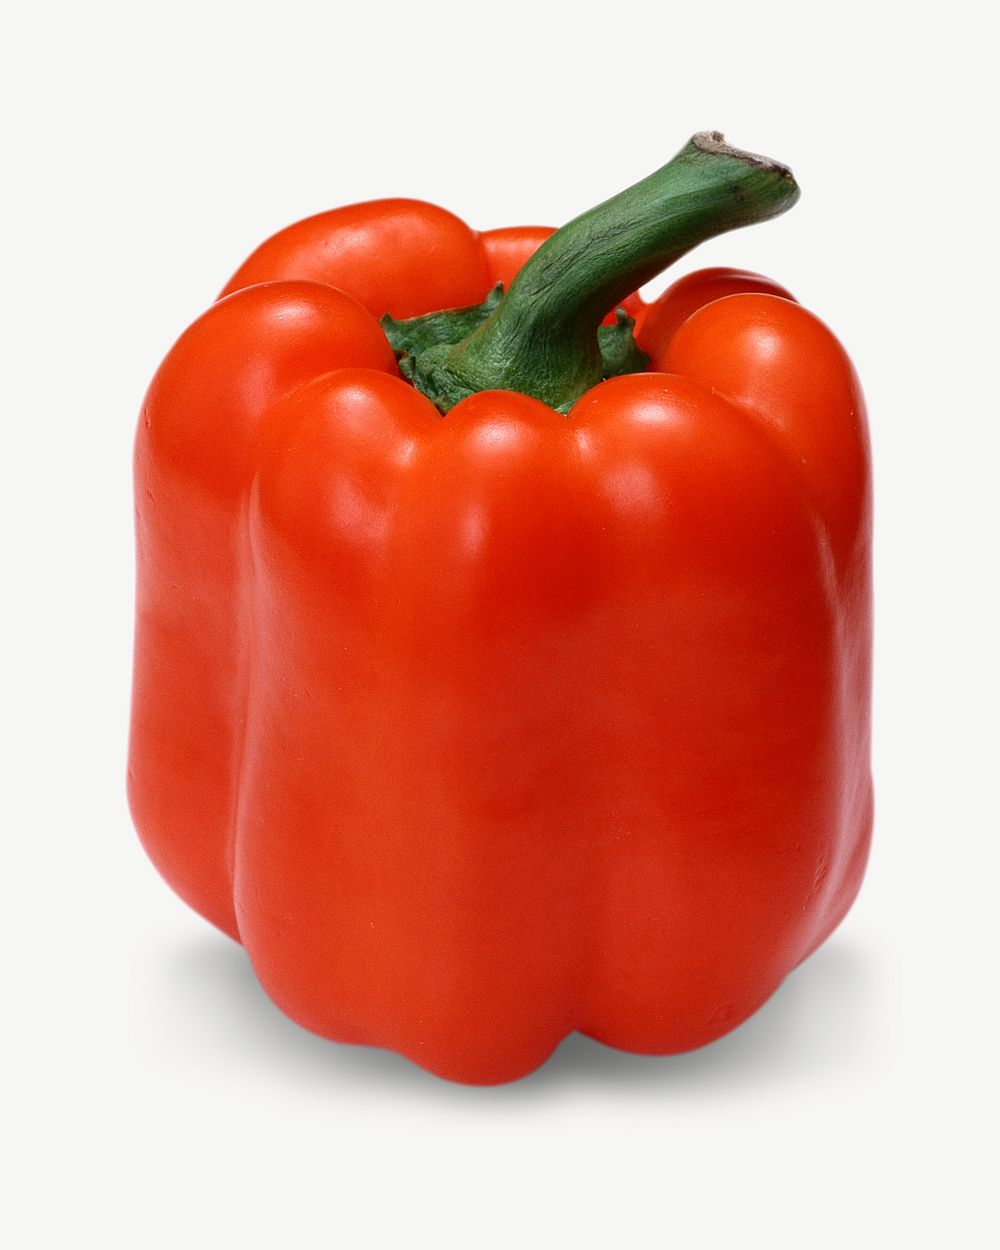 Bell pepper image graphic psd